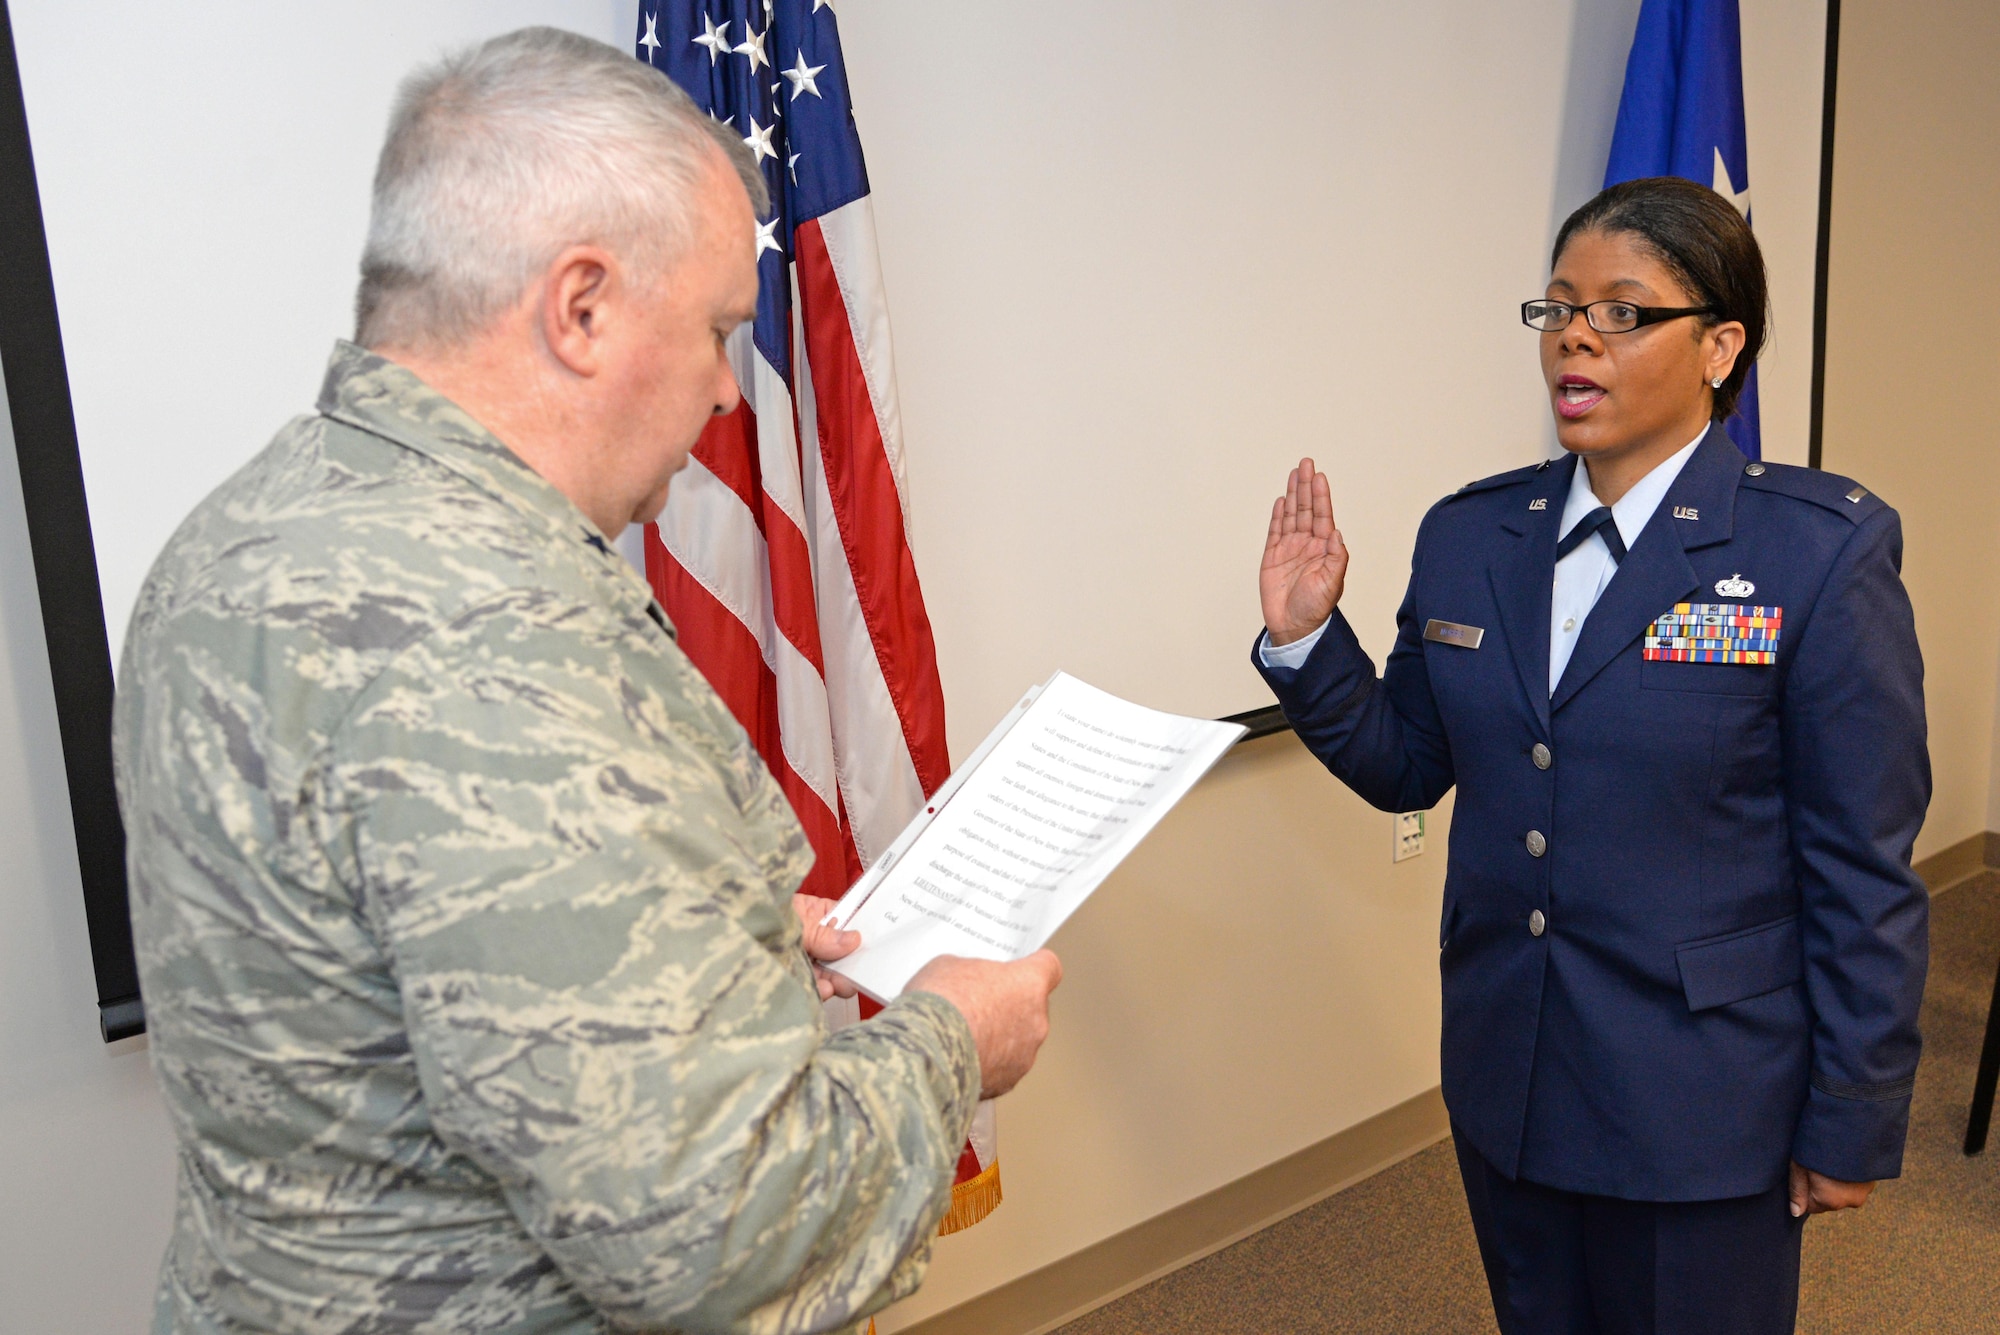 A picture of New Jersey National Guard Adjutant General Brig. Gen. Michael Cunniff swearing in U.S. Air Force 1st Lt. Anita Morris, a chaplain with the  New Jersey Air National Guard's 177th Fighter Wing, at her swearing-in ceremony, Feb. 12, 2017, at the 177th Fighter Wing.